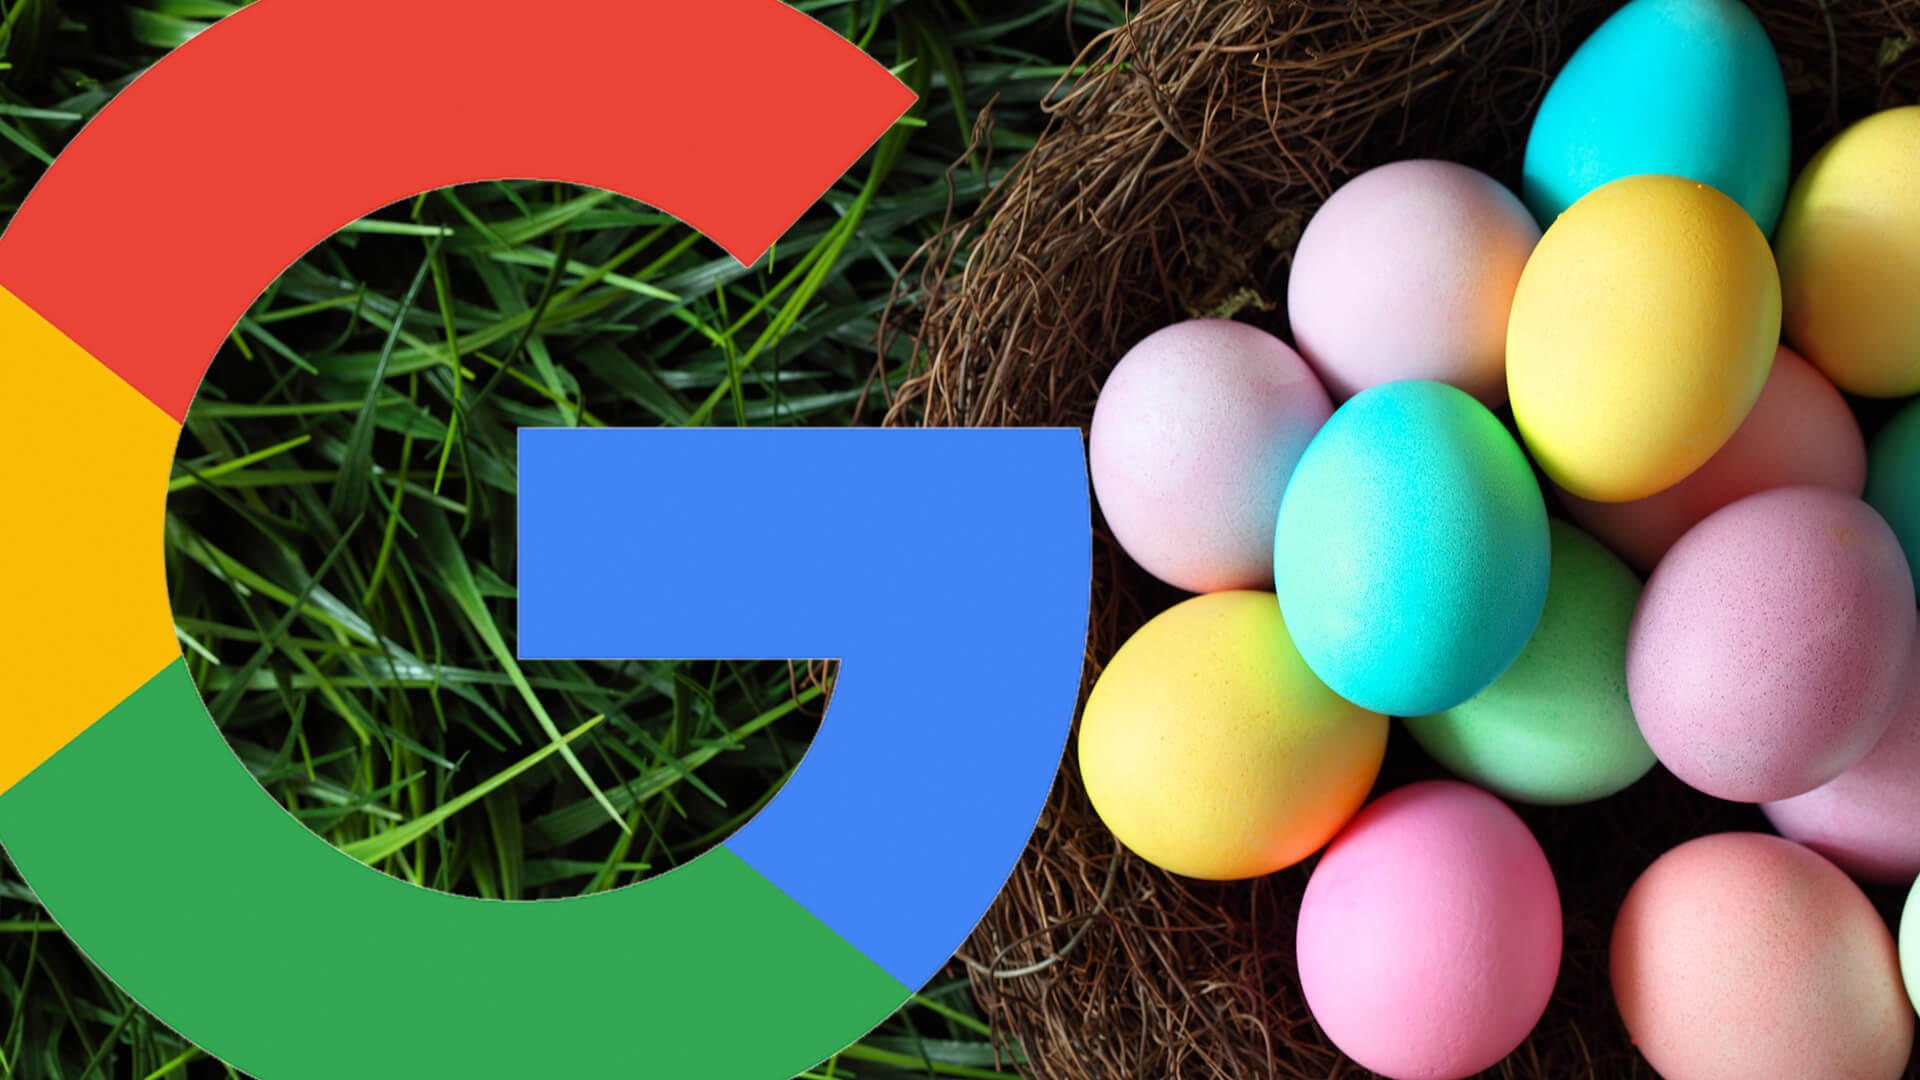 List of Google Easter Eggs (the non-exhaustive list)